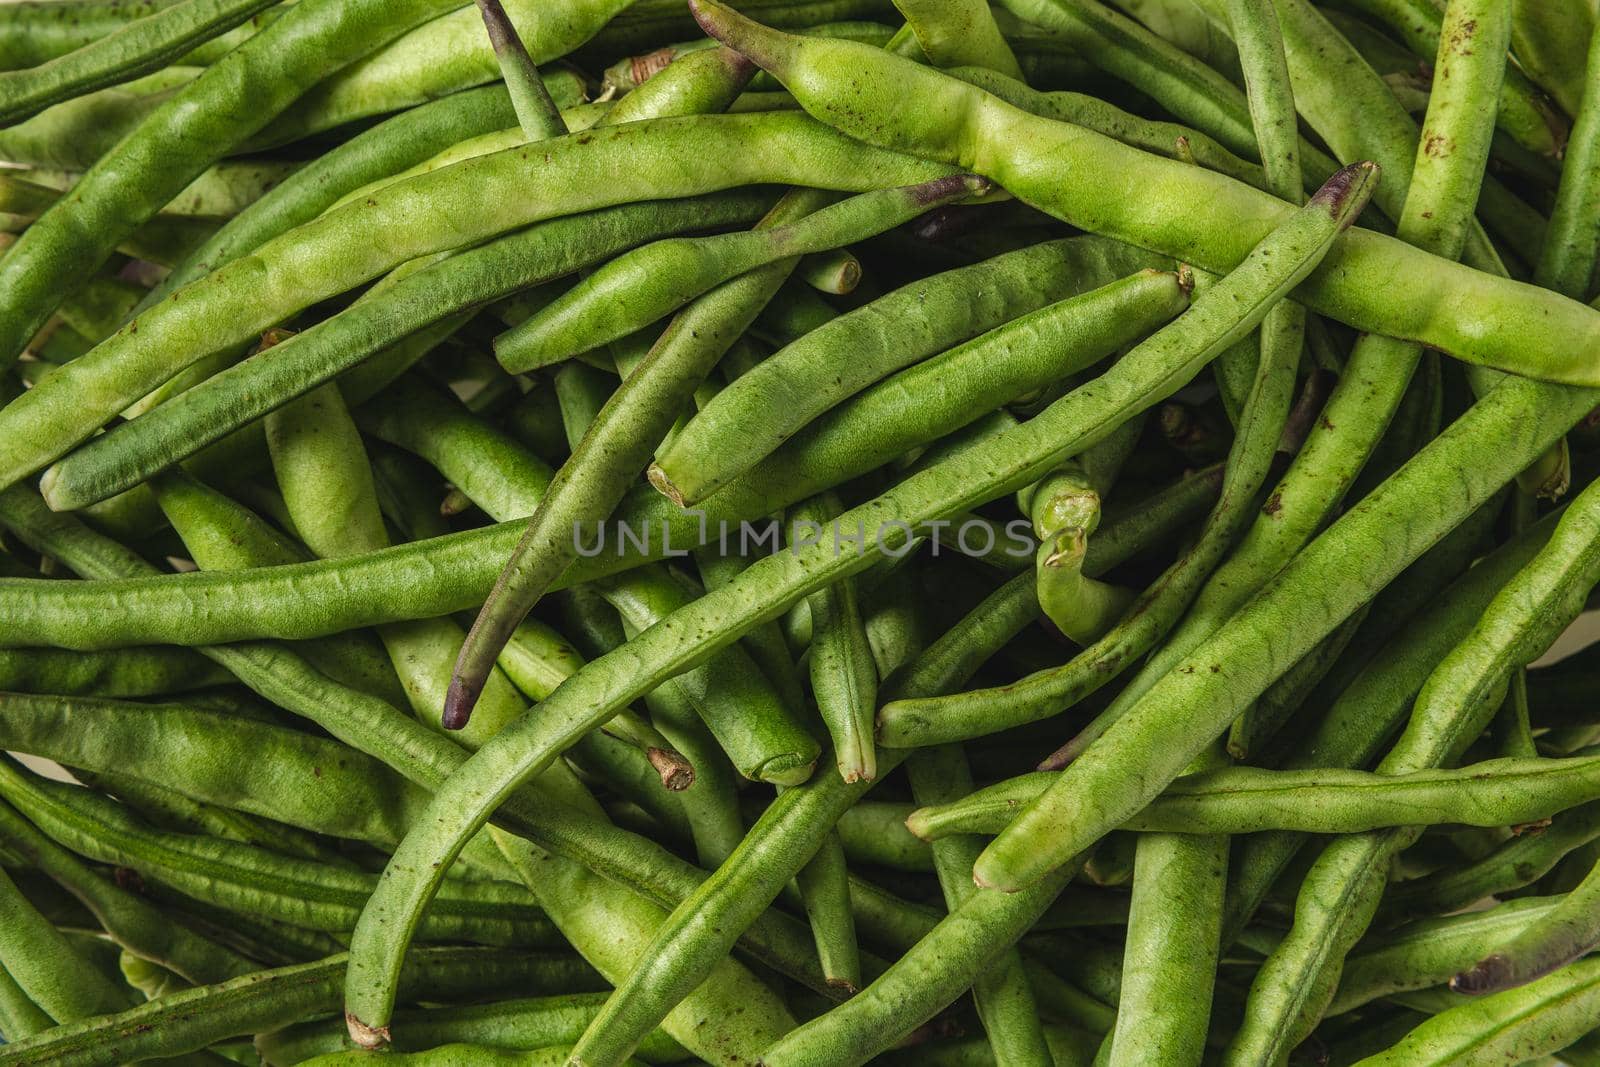 Fresh green beans in a glass bowl. Healthy eating concept